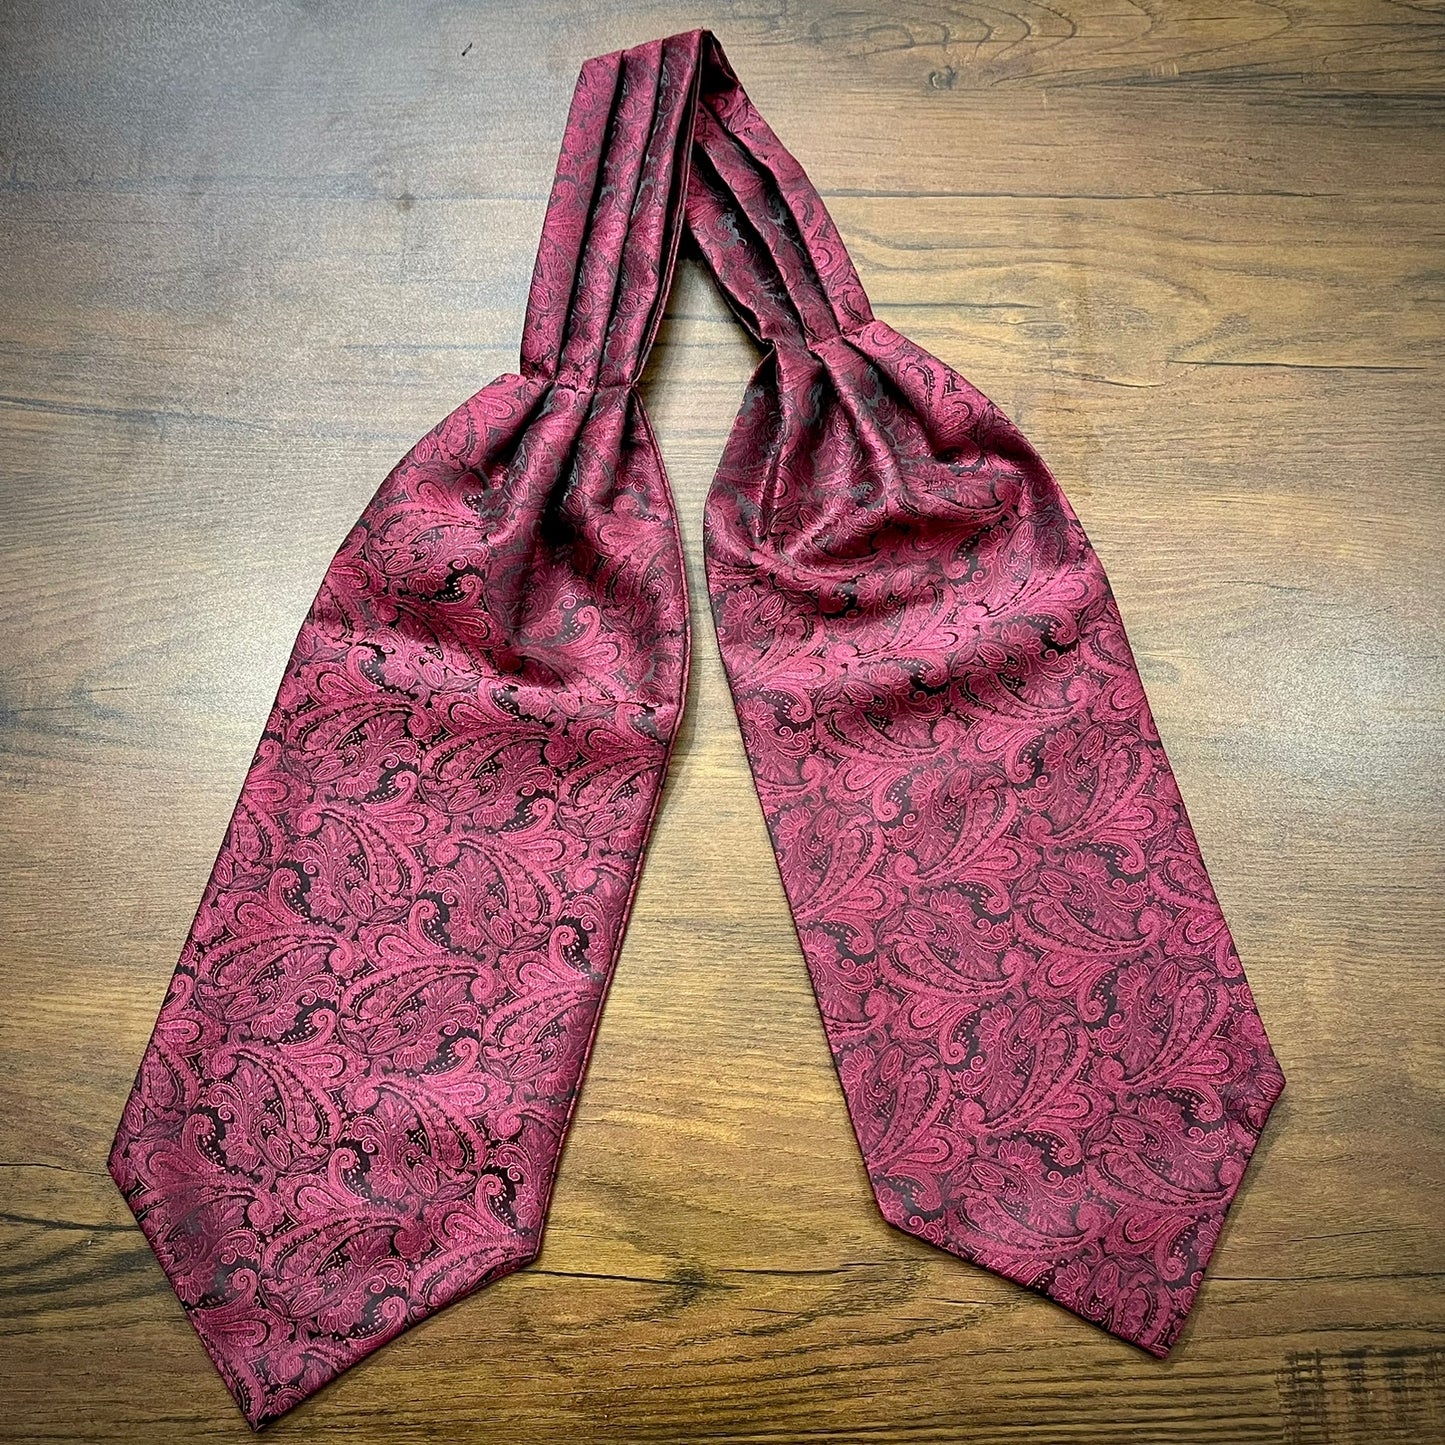 Maroon and black Floral paisley ascot cravat tie silk neck scarf for men in pakistan